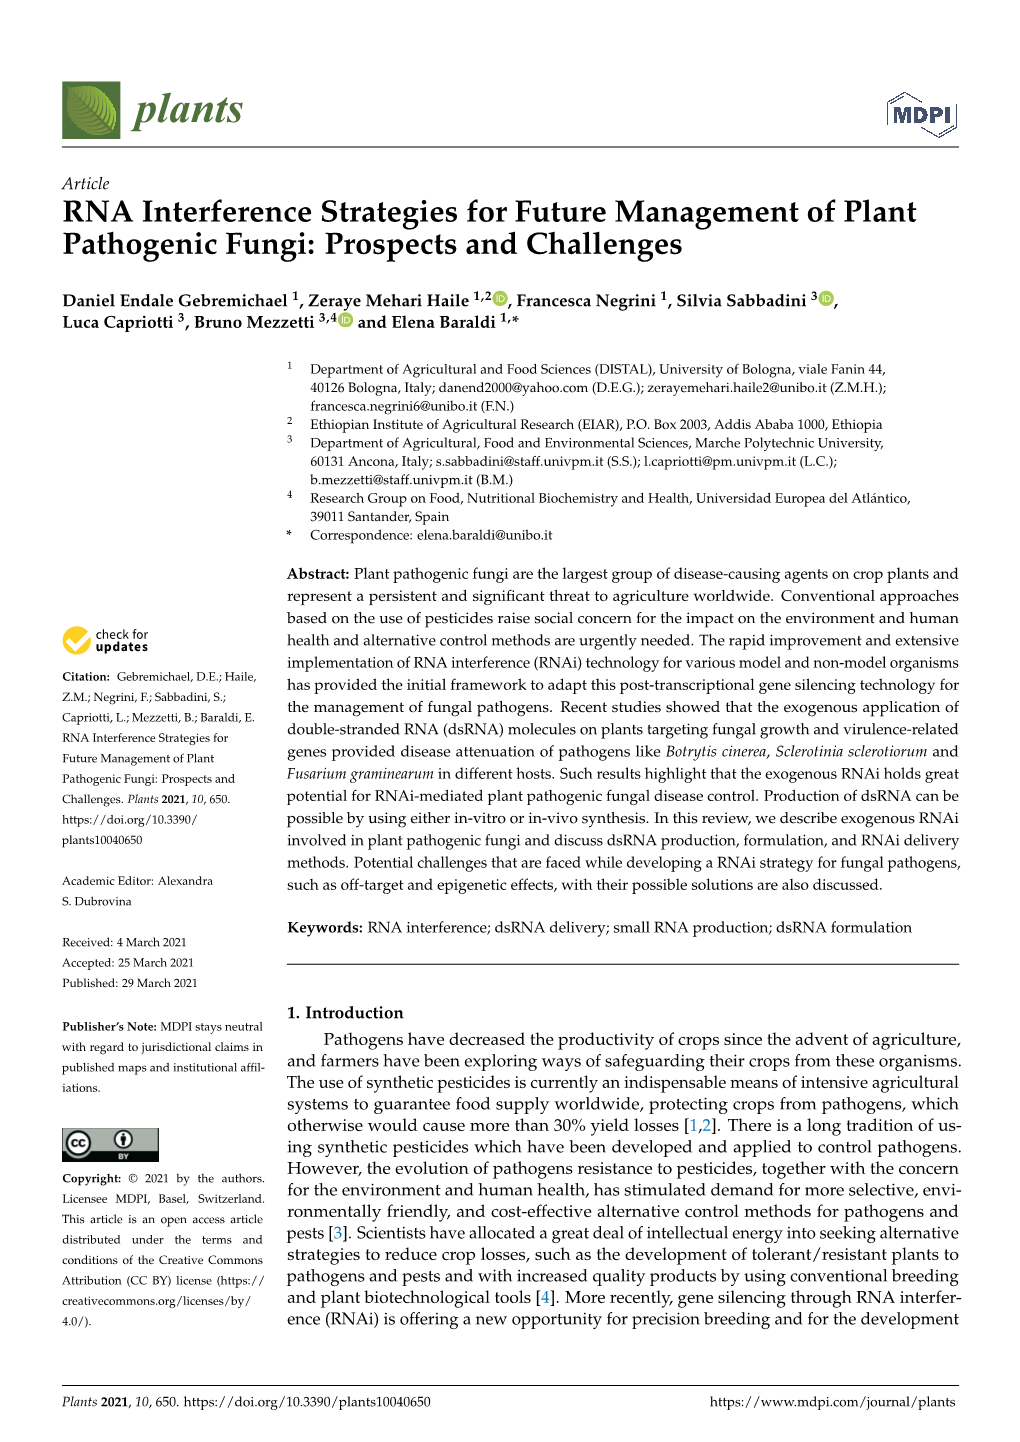 RNA Interference Strategies for Future Management of Plant Pathogenic Fungi: Prospects and Challenges